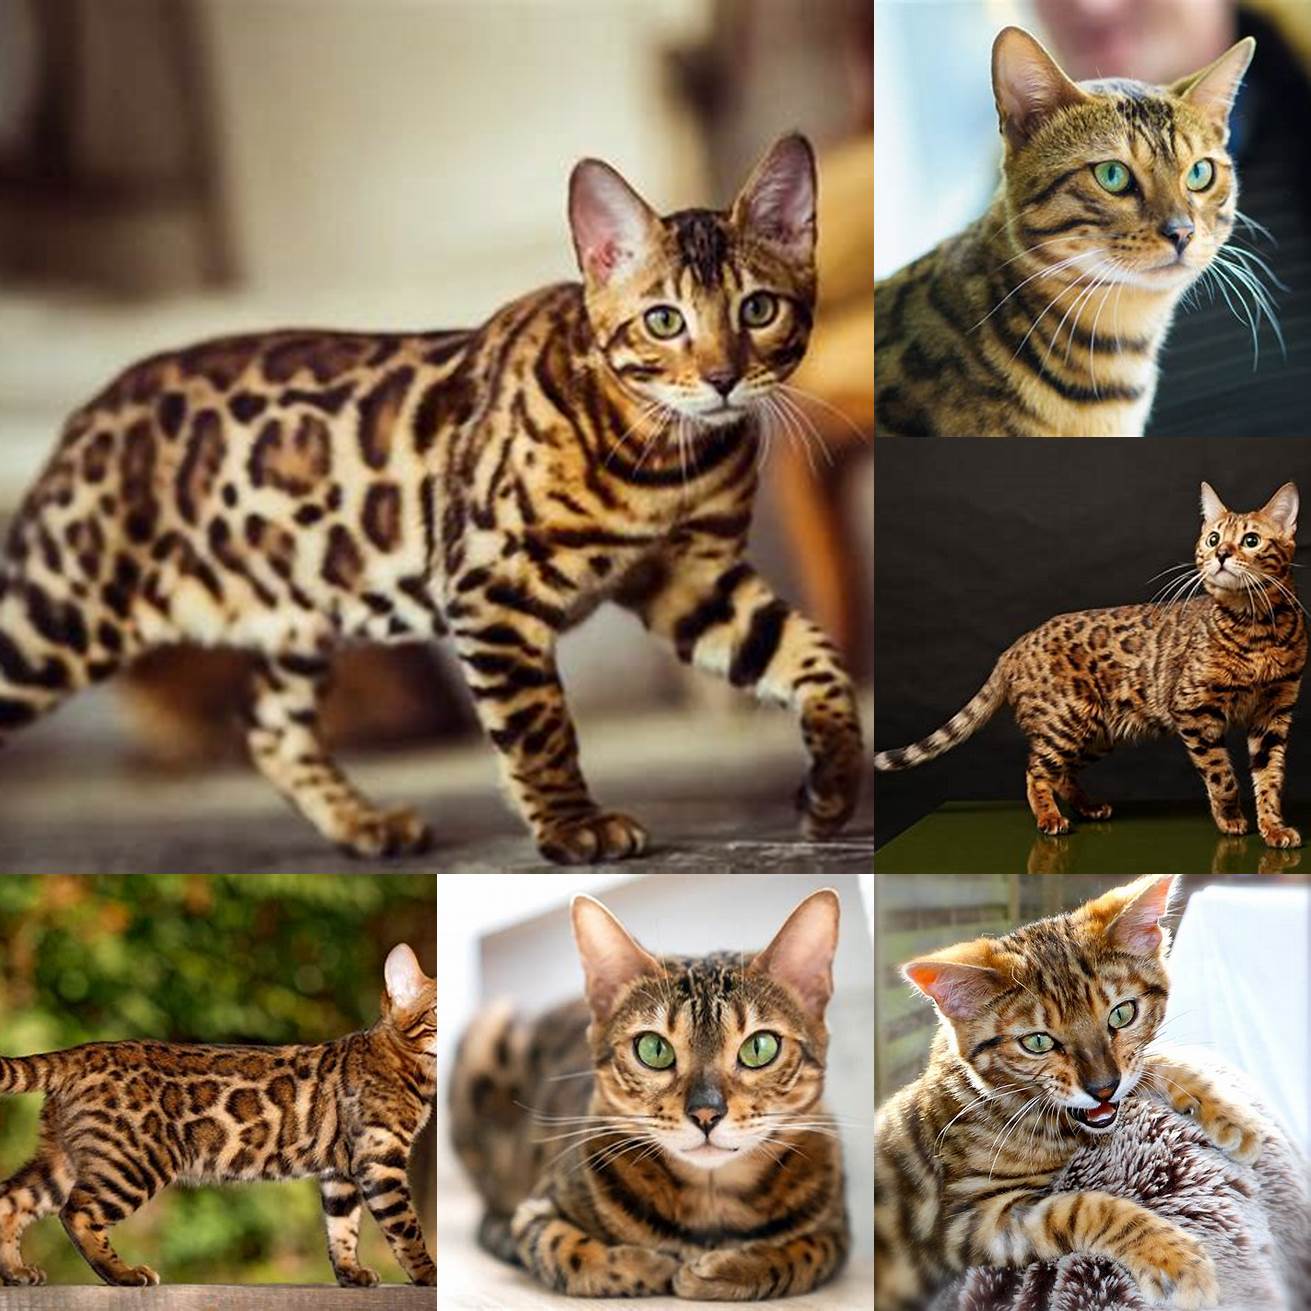 Bengal cats are highly intelligent and can be trained to do tricks and even walk on a leash